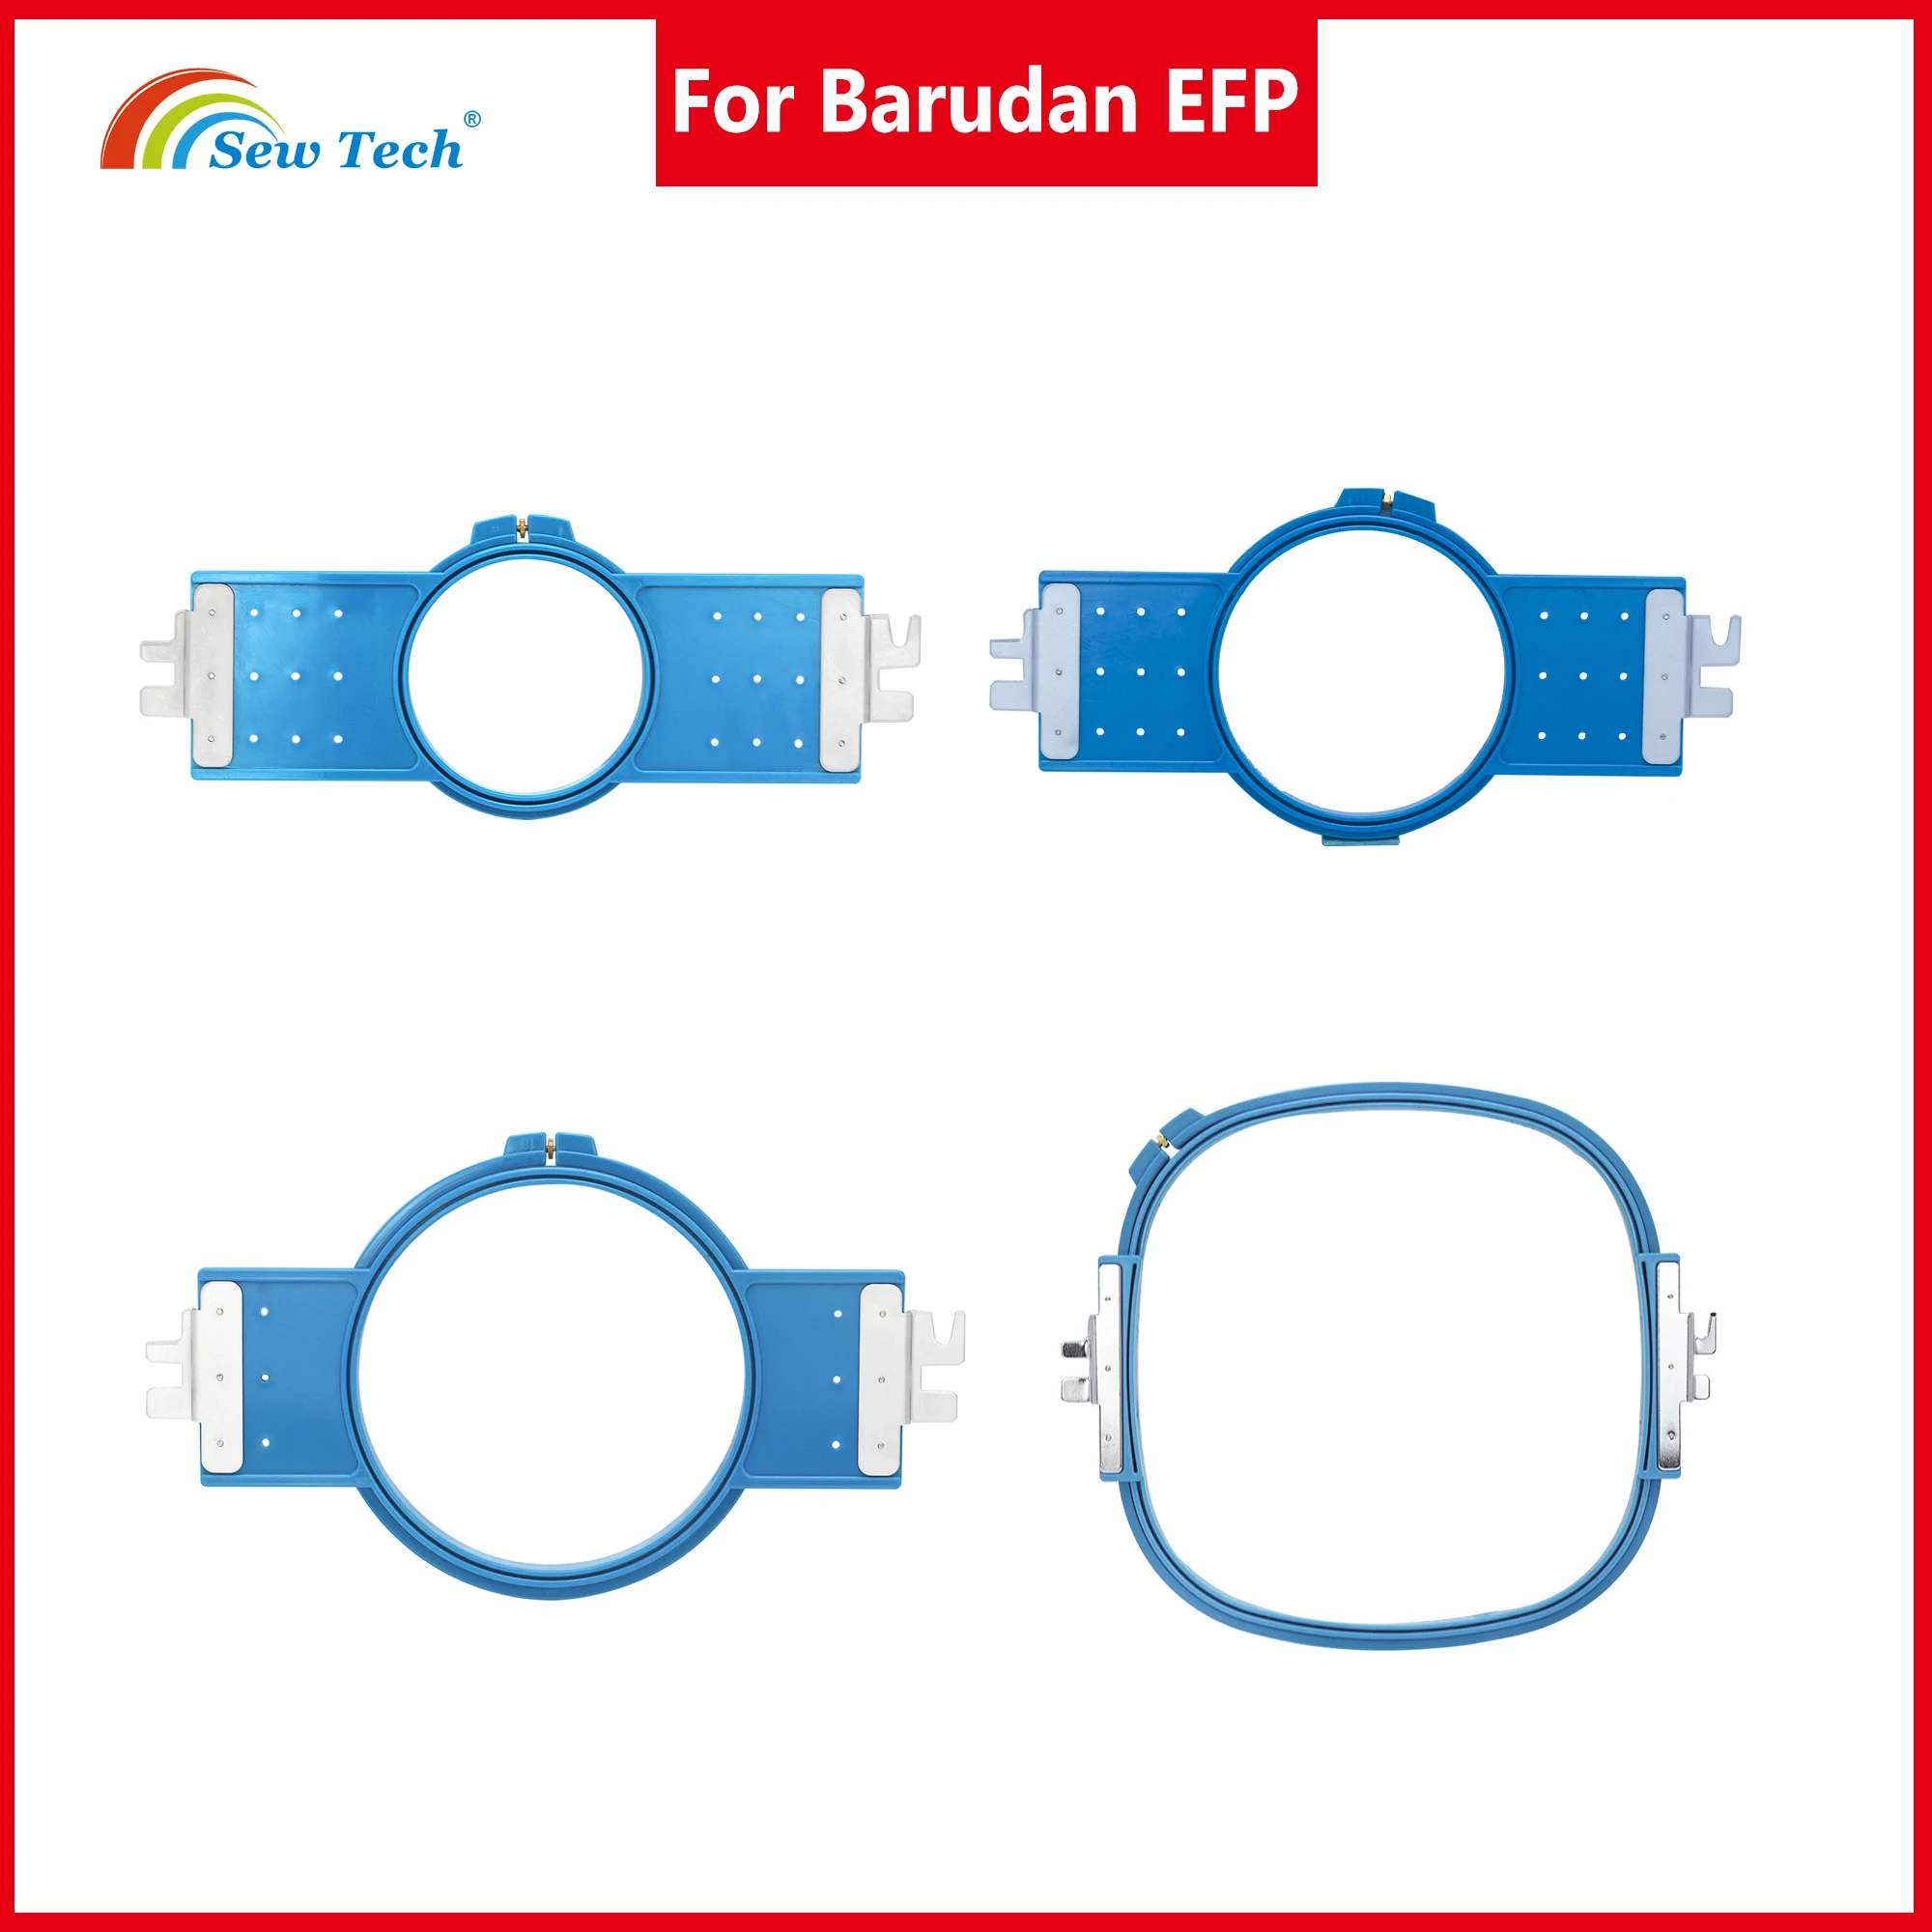 

Sew Tech Embroidery Hoops for Barudan EFP, Sewing and Embroidery Machine Rings Tubular Frames